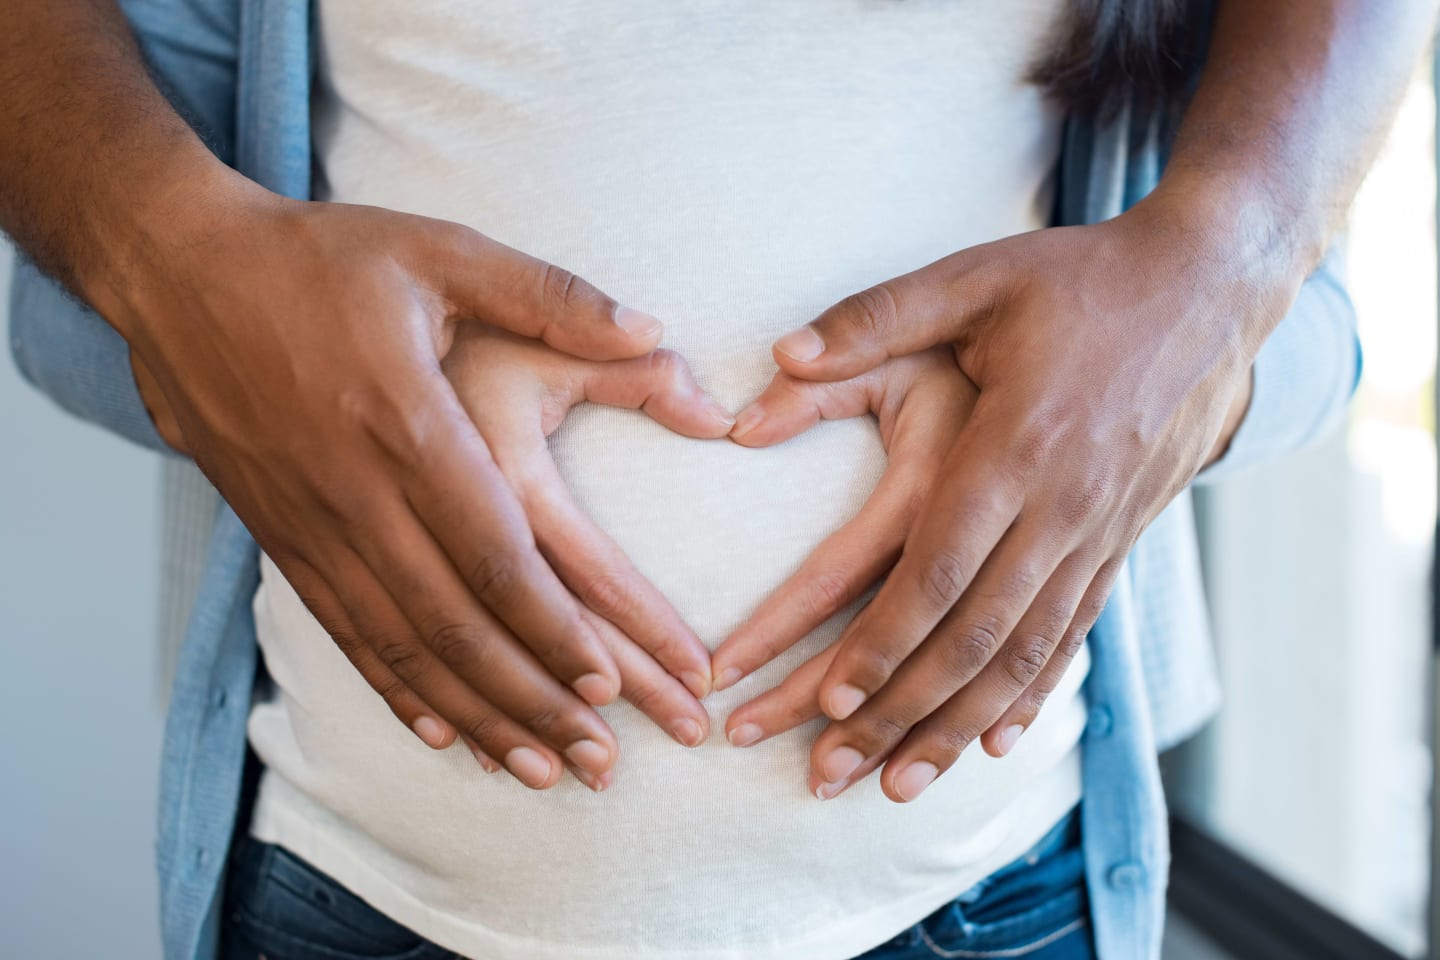 A couple holding their hands over a pregnant belly to form a heart shape